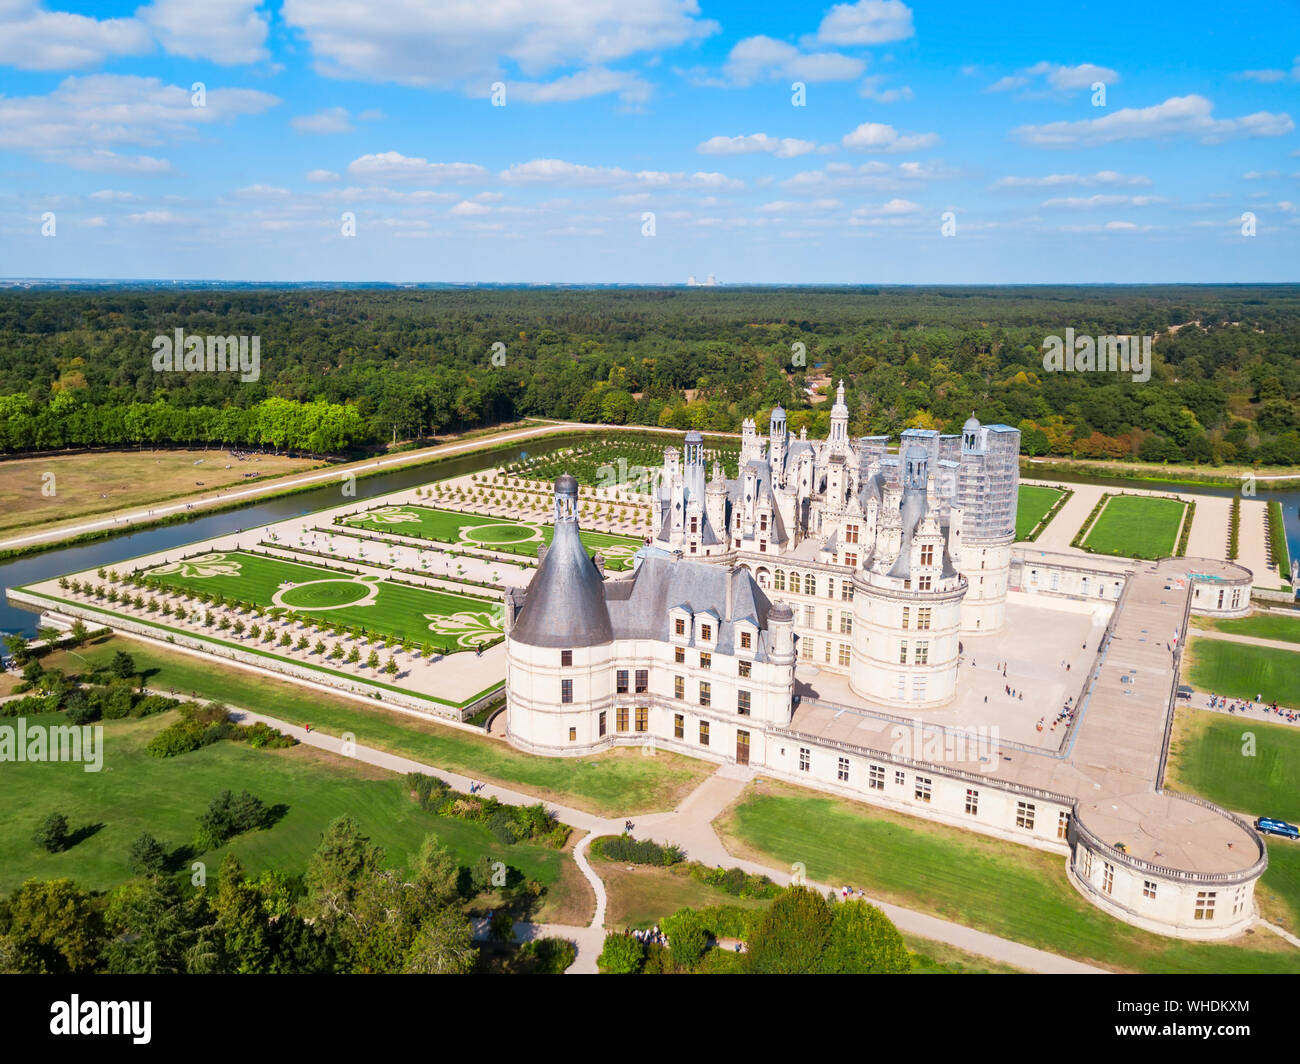 Chateau de Chambord is the largest castle in the Loire valley, France Stock Photo